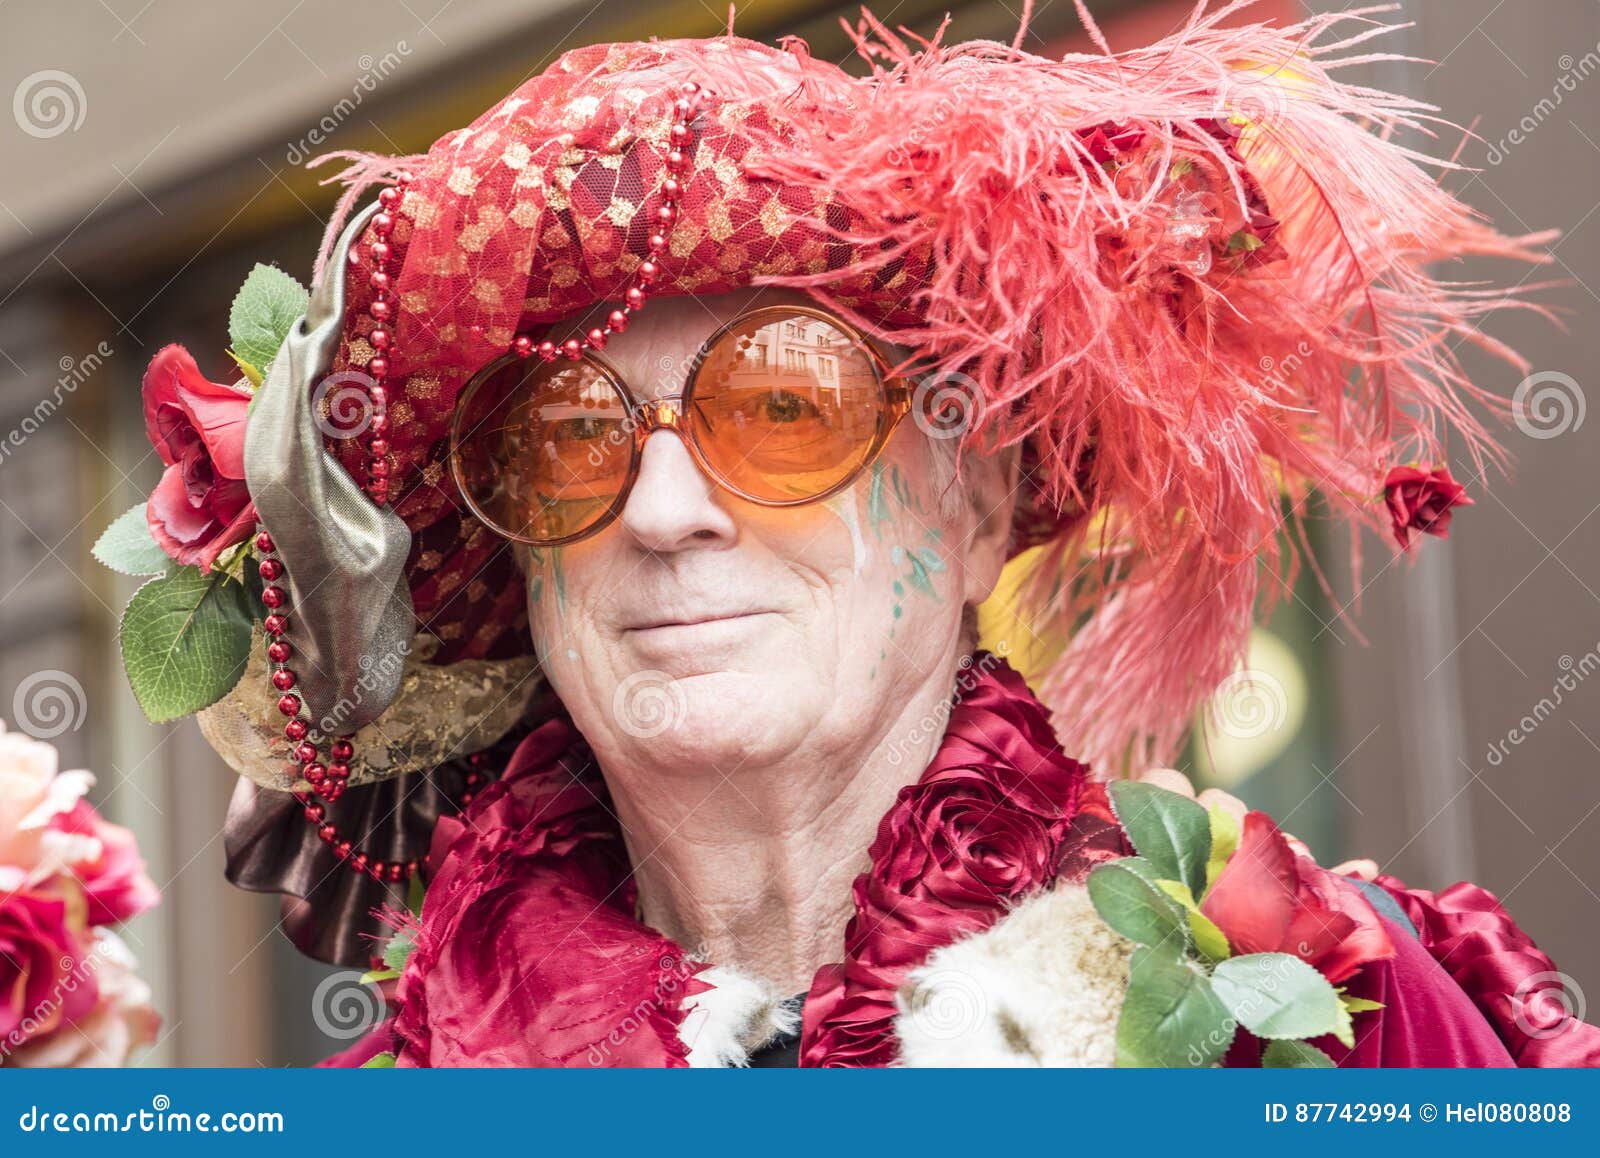 Man Costumed at Carnival Zurich Editorial Stock Image - Image of ...